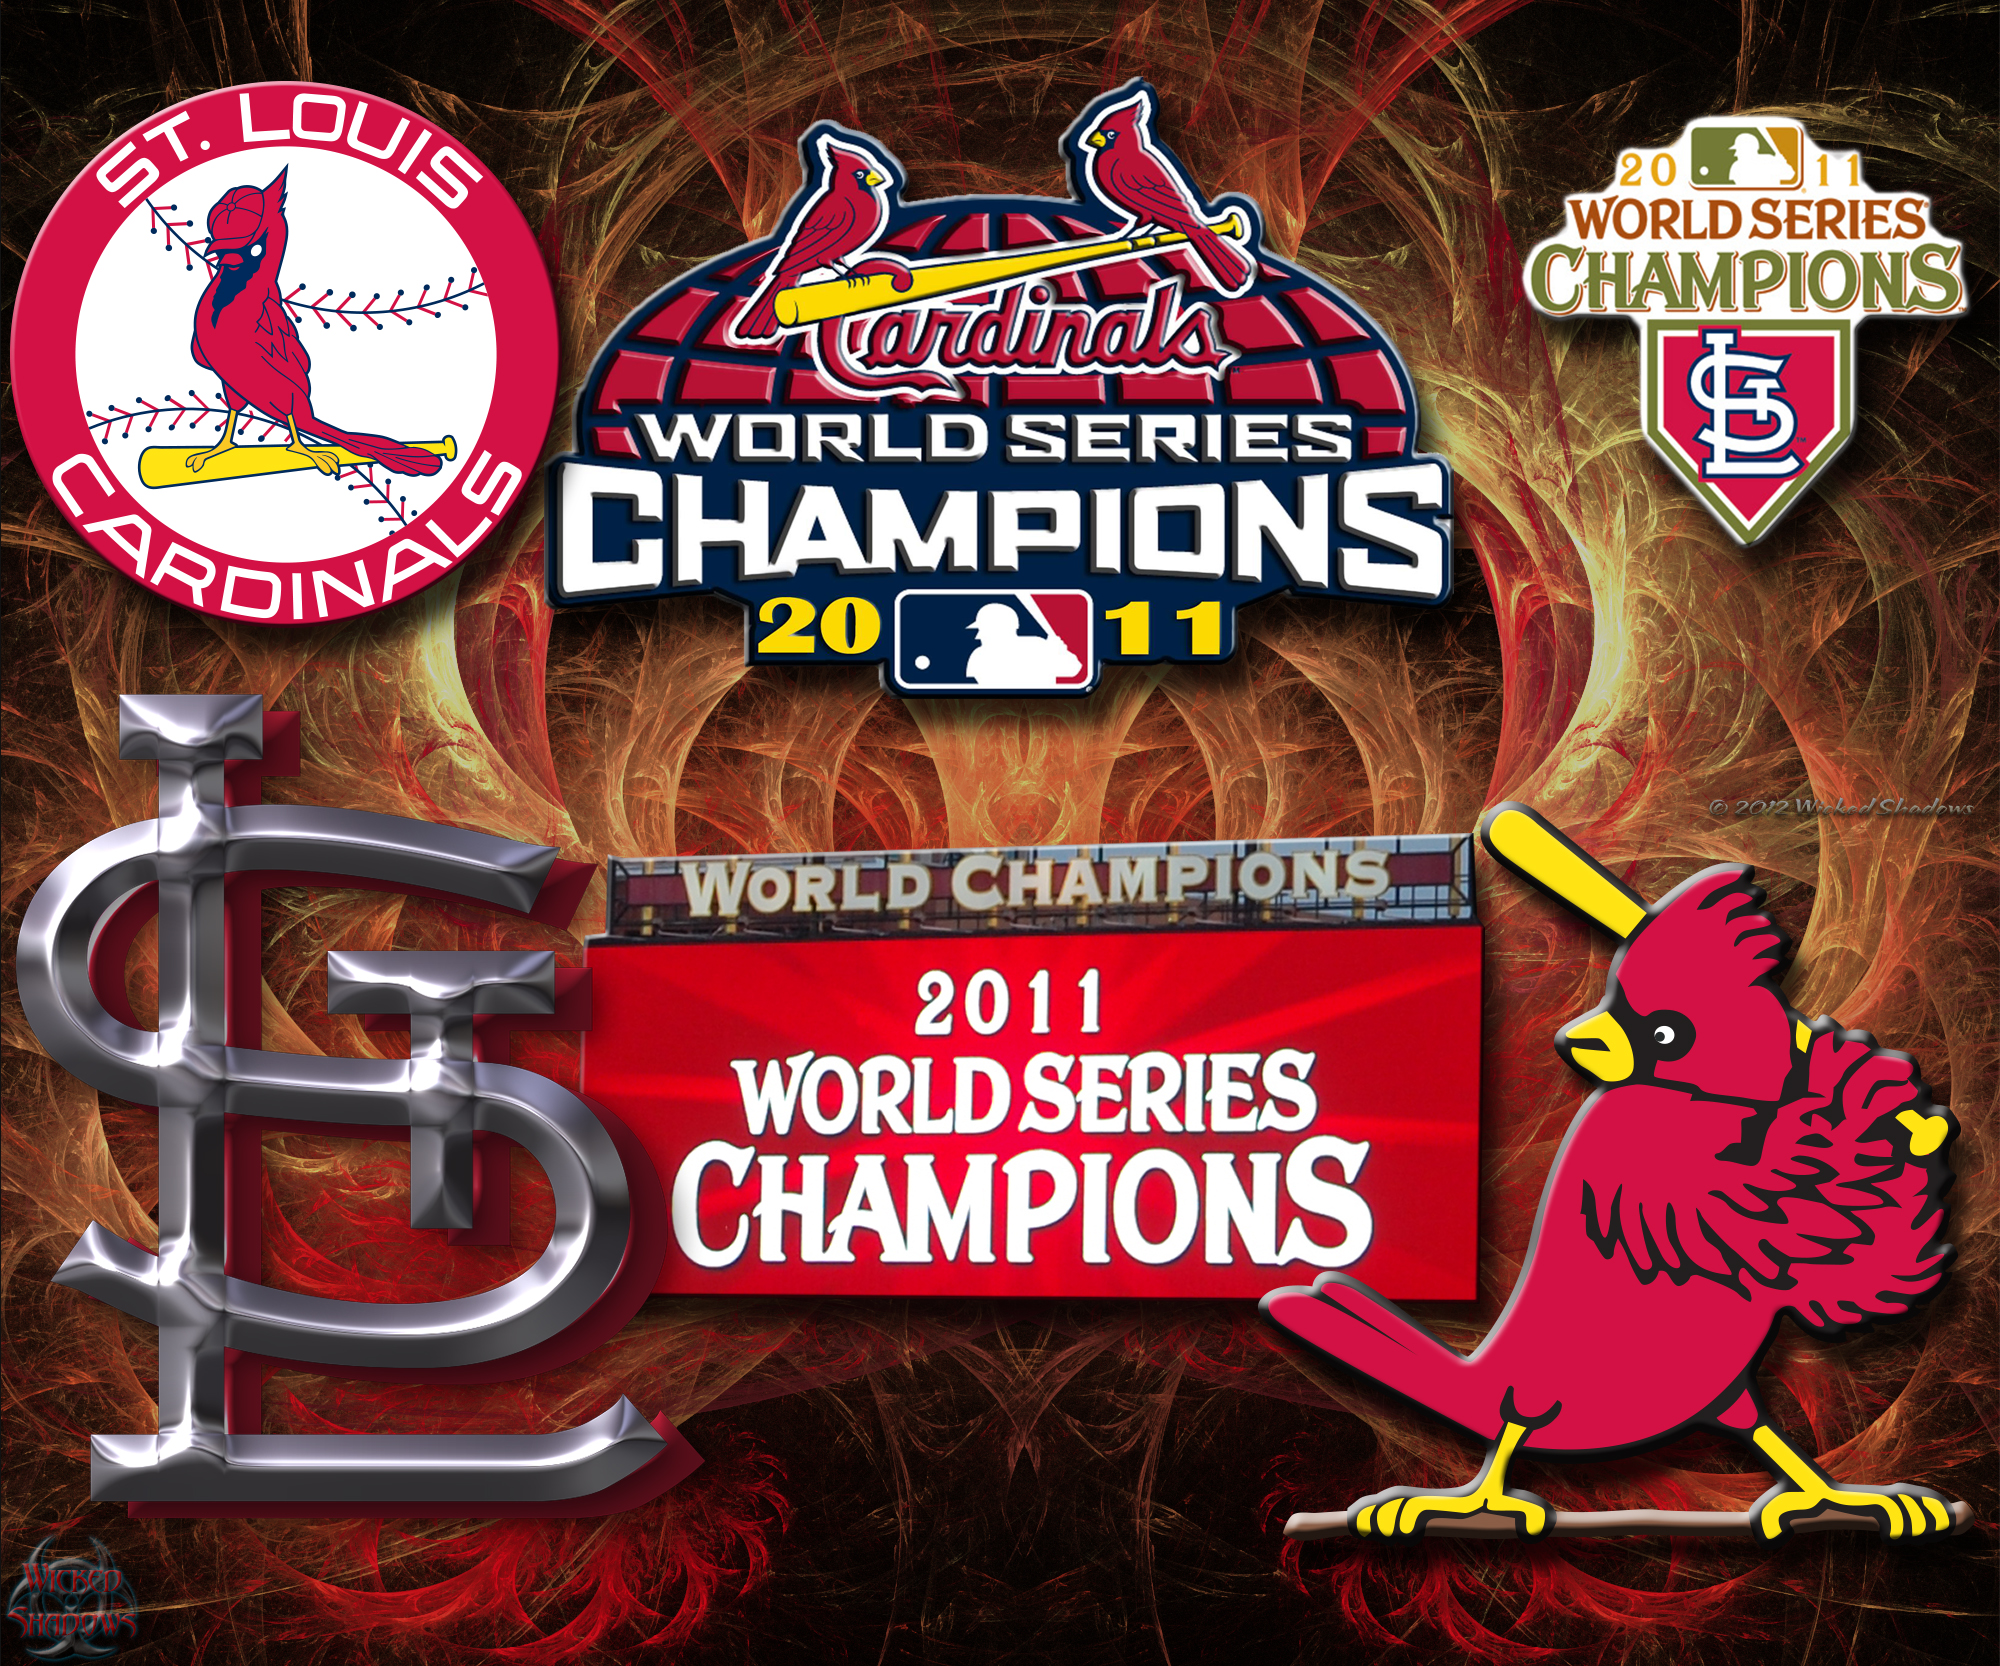 St. Louis Cardinals World Series Celebration 2011 Poster - Costacos Sports